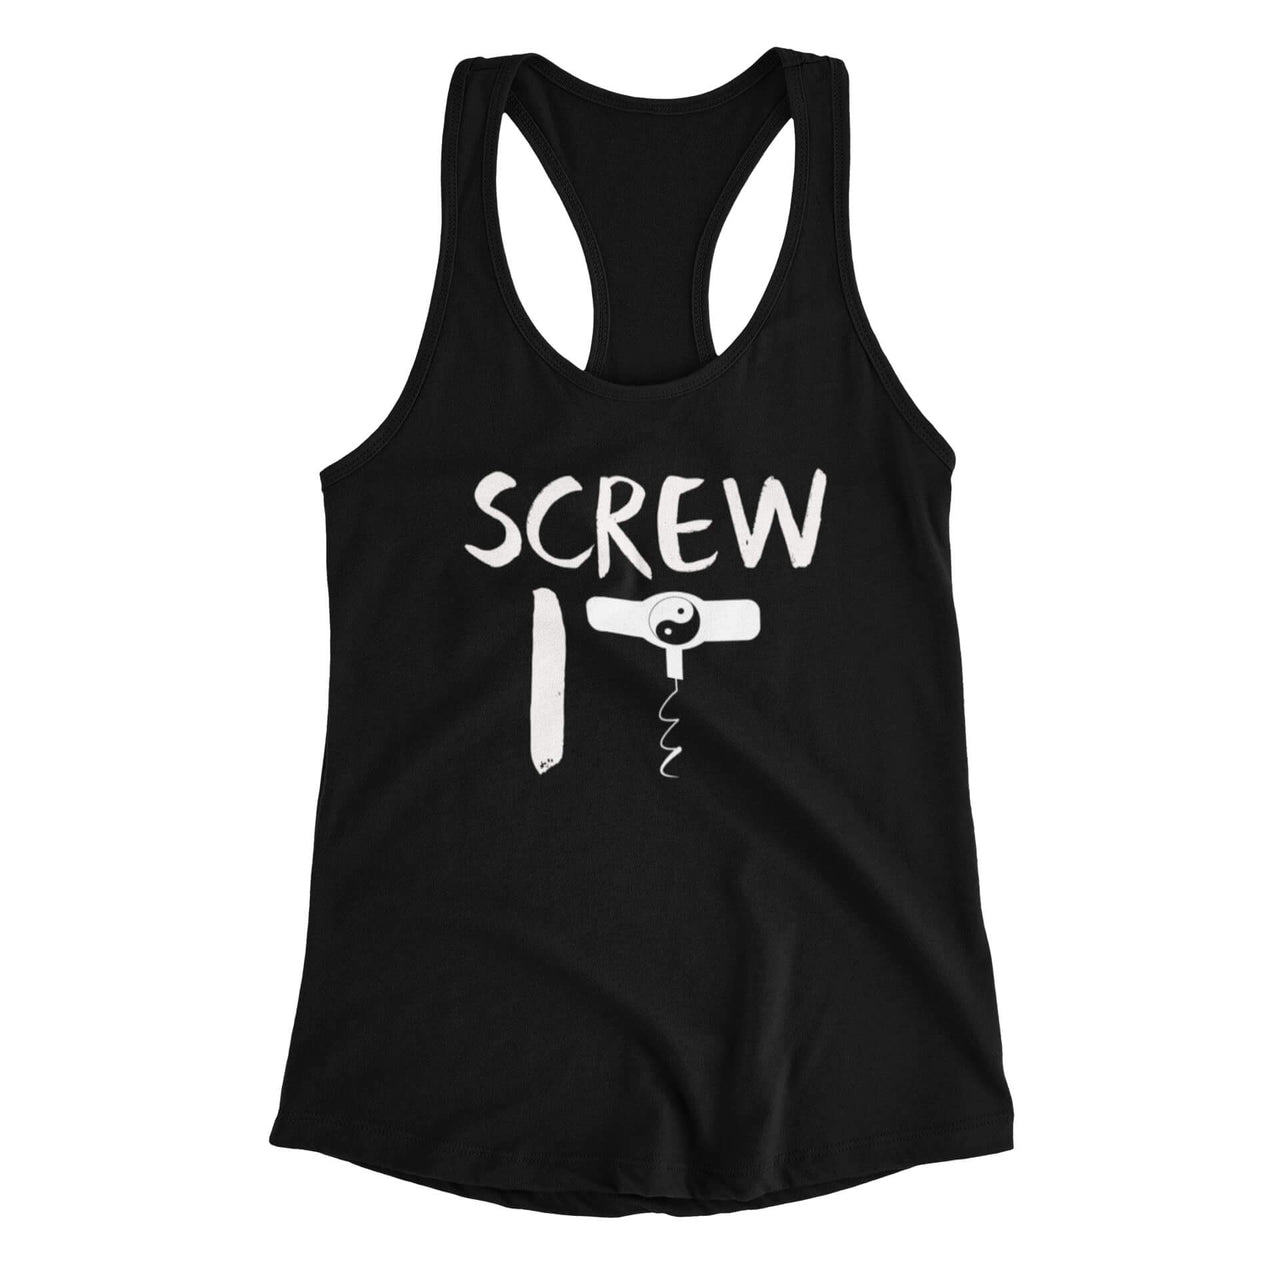 Black Racerback with text 'screw it' and a cork screw T forming a yin yang symbol, by WooHoo Apparel.